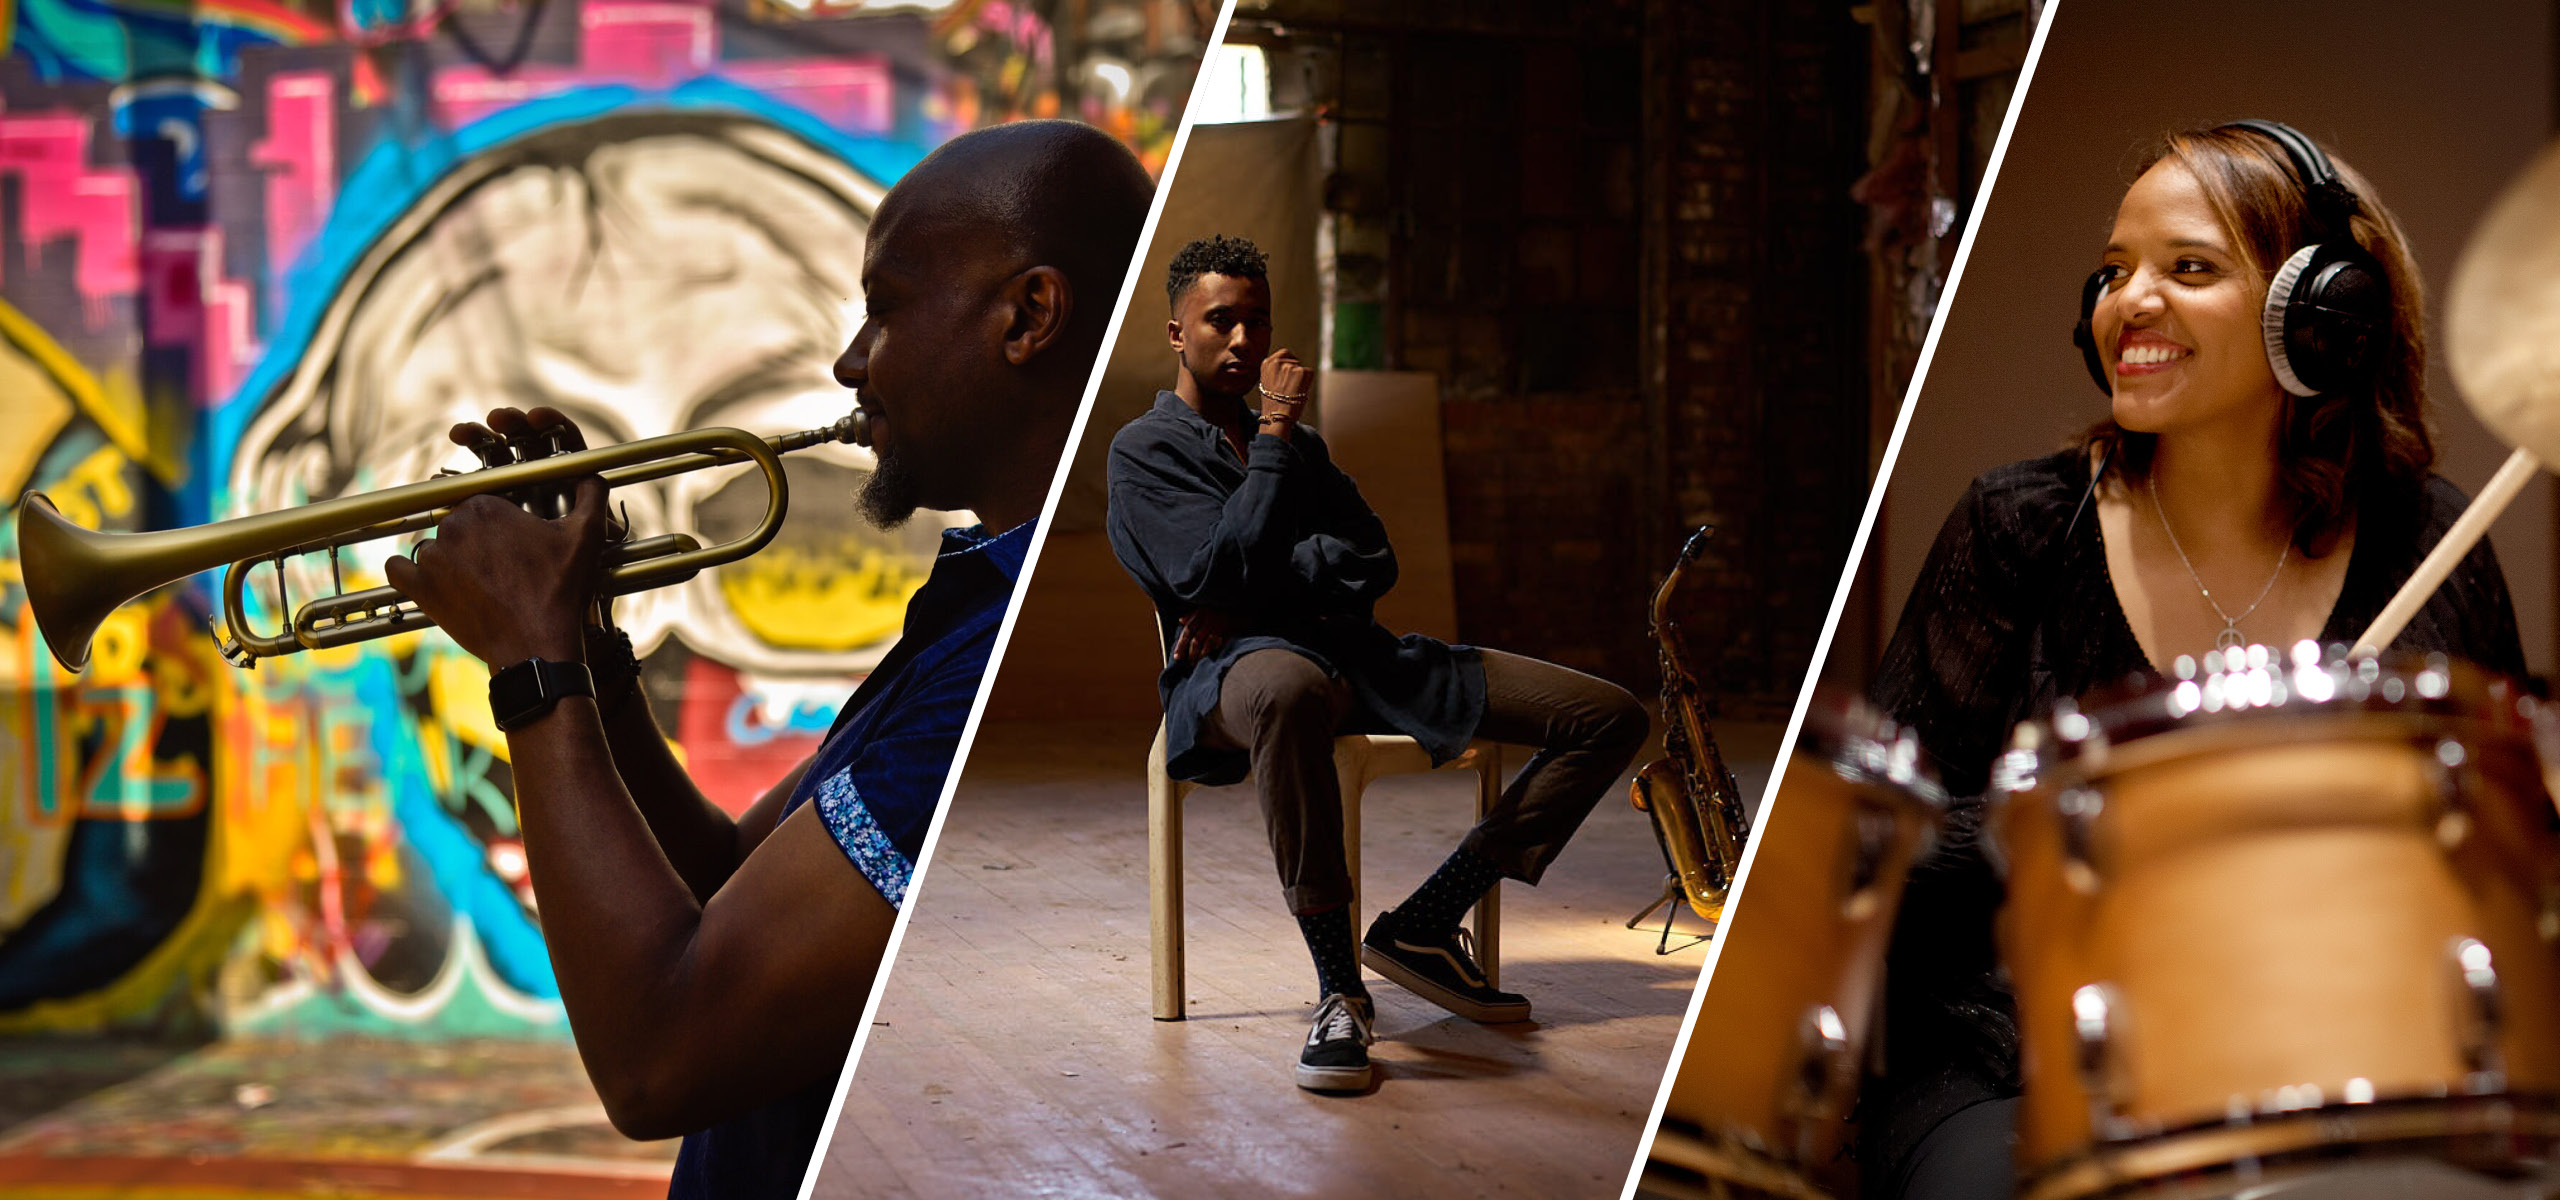 Three images combined into a collage featuring Sean Jones on trumpet, Braxton Cook with a saxiphone, and Terri Lyne Carrington on drums.